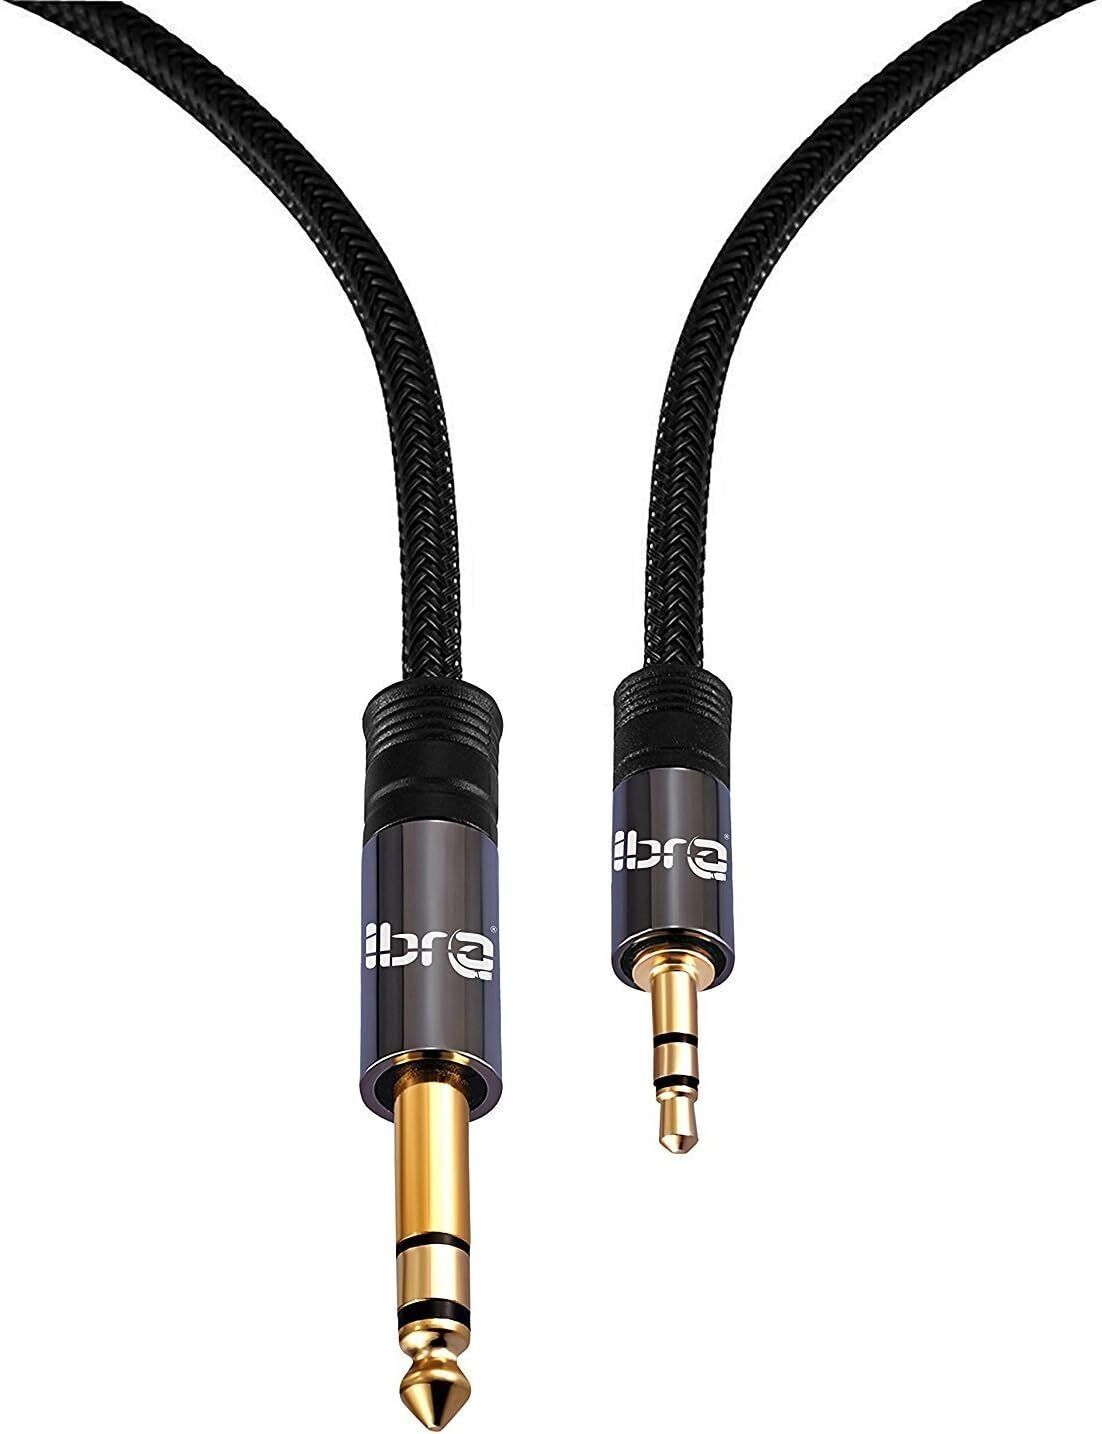 3.5mm to 6.35mm 1/4 inch Small to Big Mono Jack Audio Cable Plug Patch Lead Amp - 7.5M